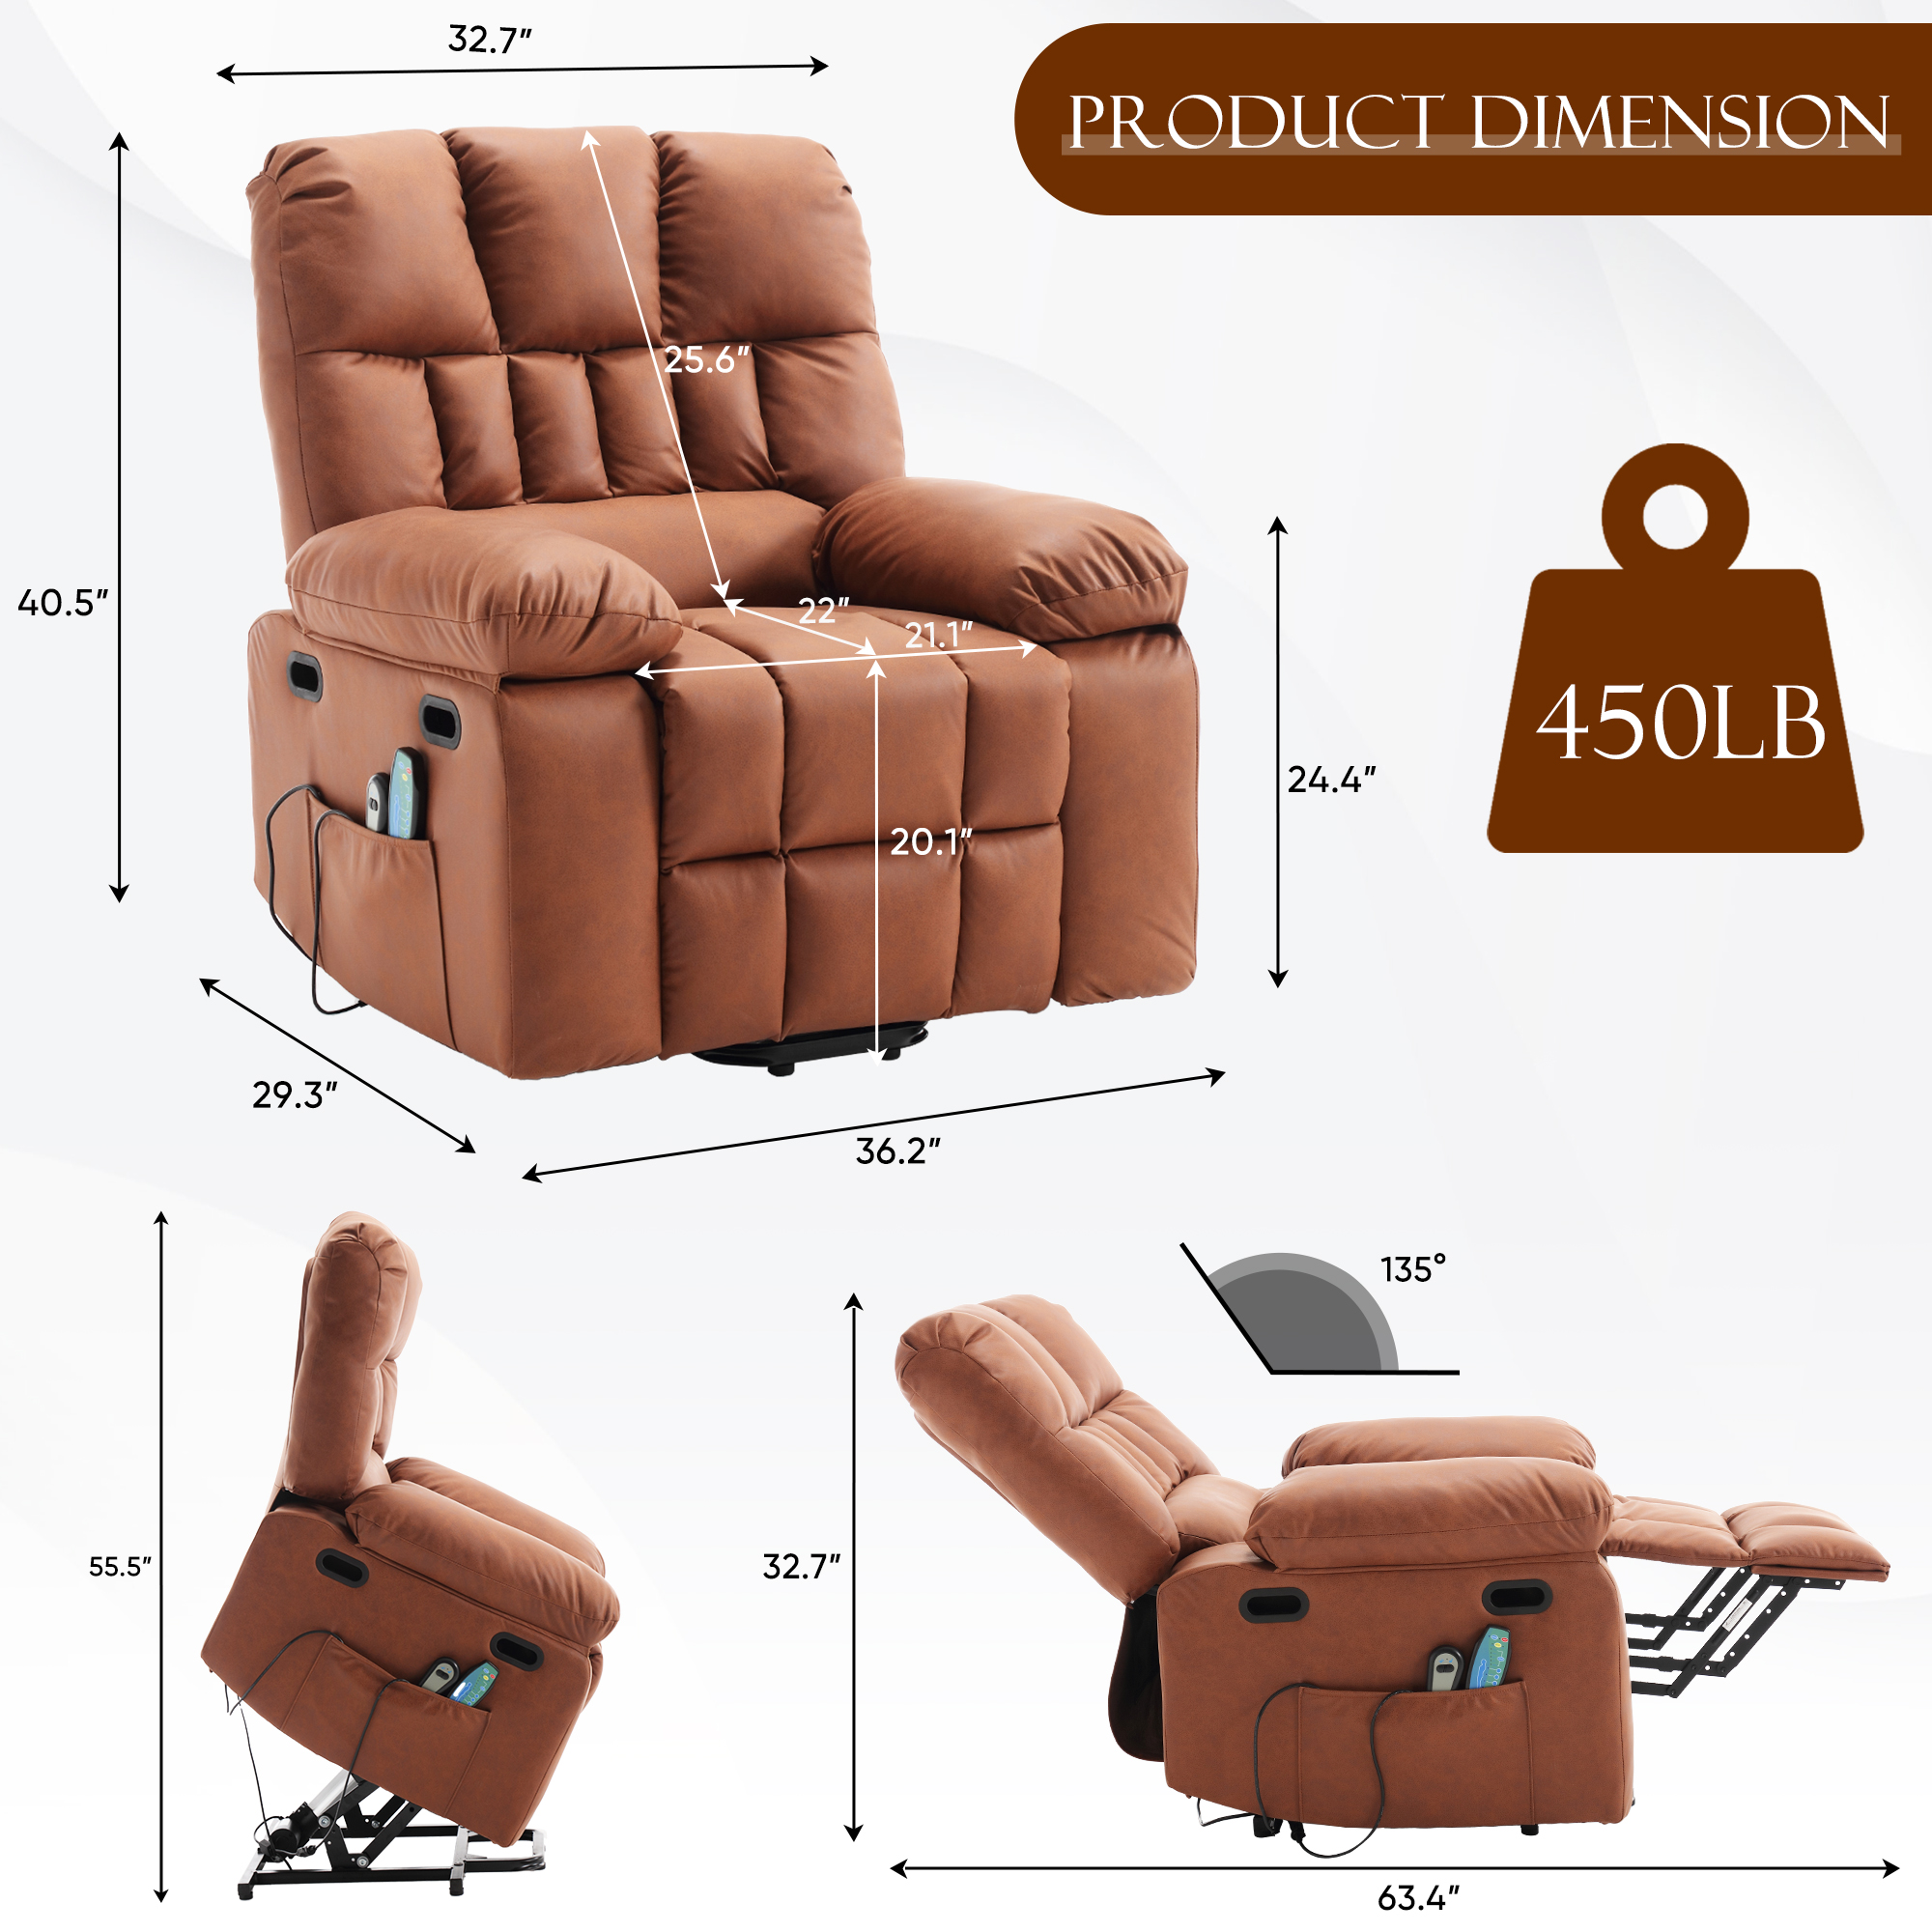 Muumblus Oversize Power Lift Recliner Chair Recliners for Elderly, Heat and Massage, PU Leather Sofa Chair for Living Room Bedroom, Light Brown - image 3 of 9